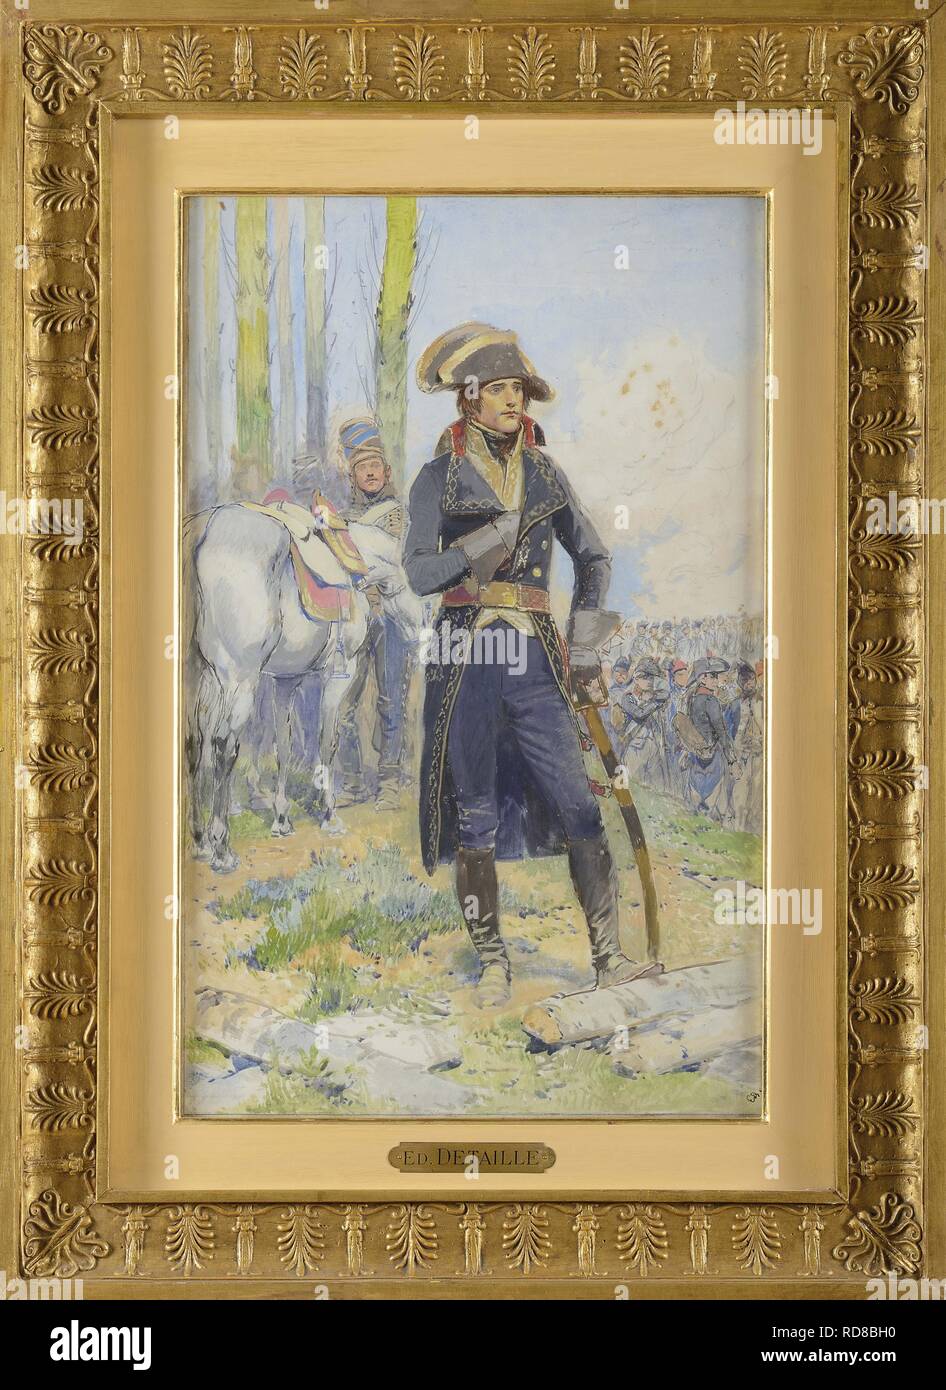 General Bonaparte during the Italian campaign. Museum: PRIVATE COLLECTION. Author: DETAILLE, EDOUARD. Stock Photo